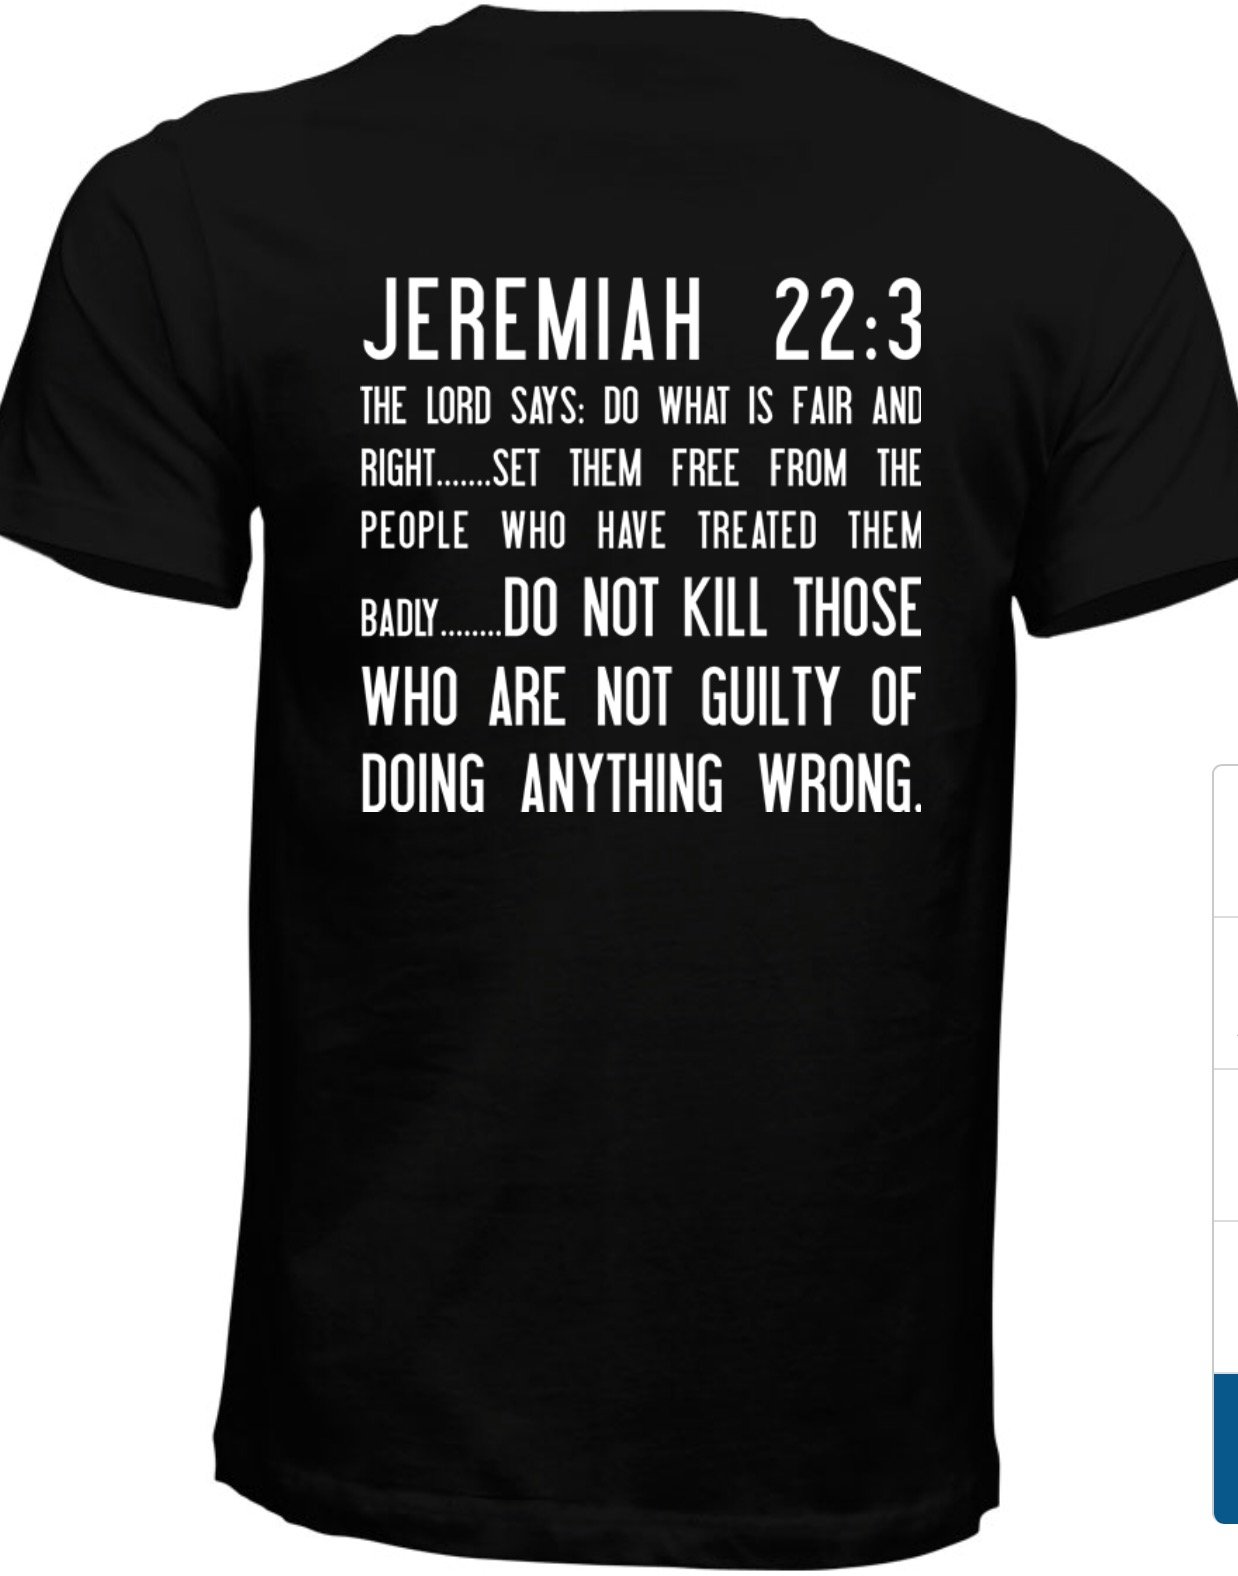 Image of MEN'S GOT JUSTICE (T-Shirt will reflect Jeremiah 22:3)